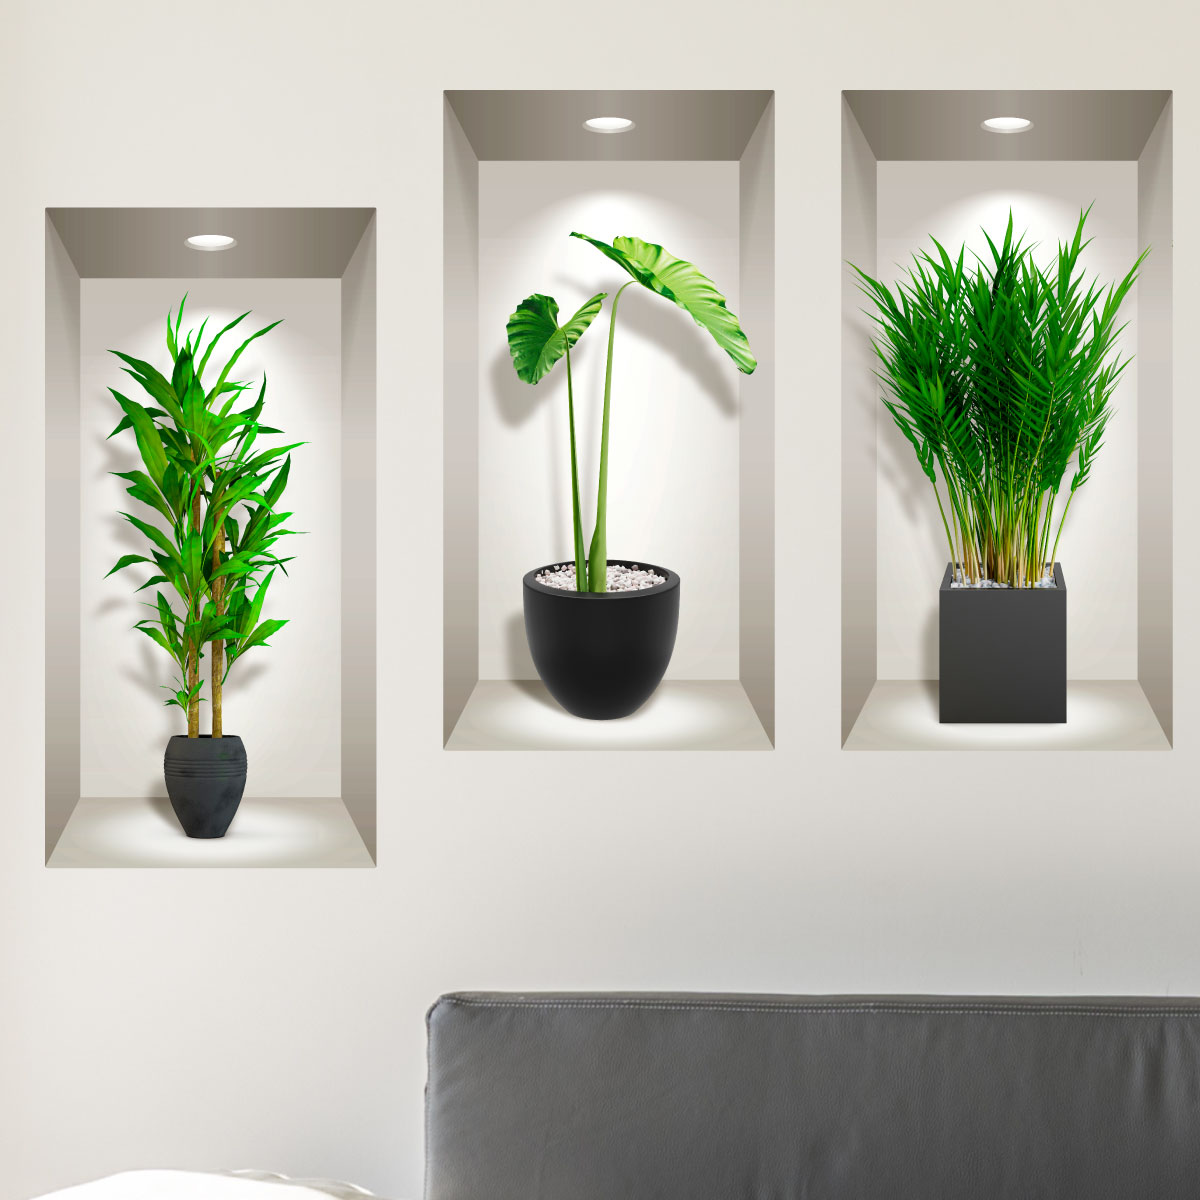 https://www.ambiance-sticker.com/images/Image/sticker-3d-plantes-pour-la-deco-ambiance-sticker-col-3d-ROS-C493.jpg